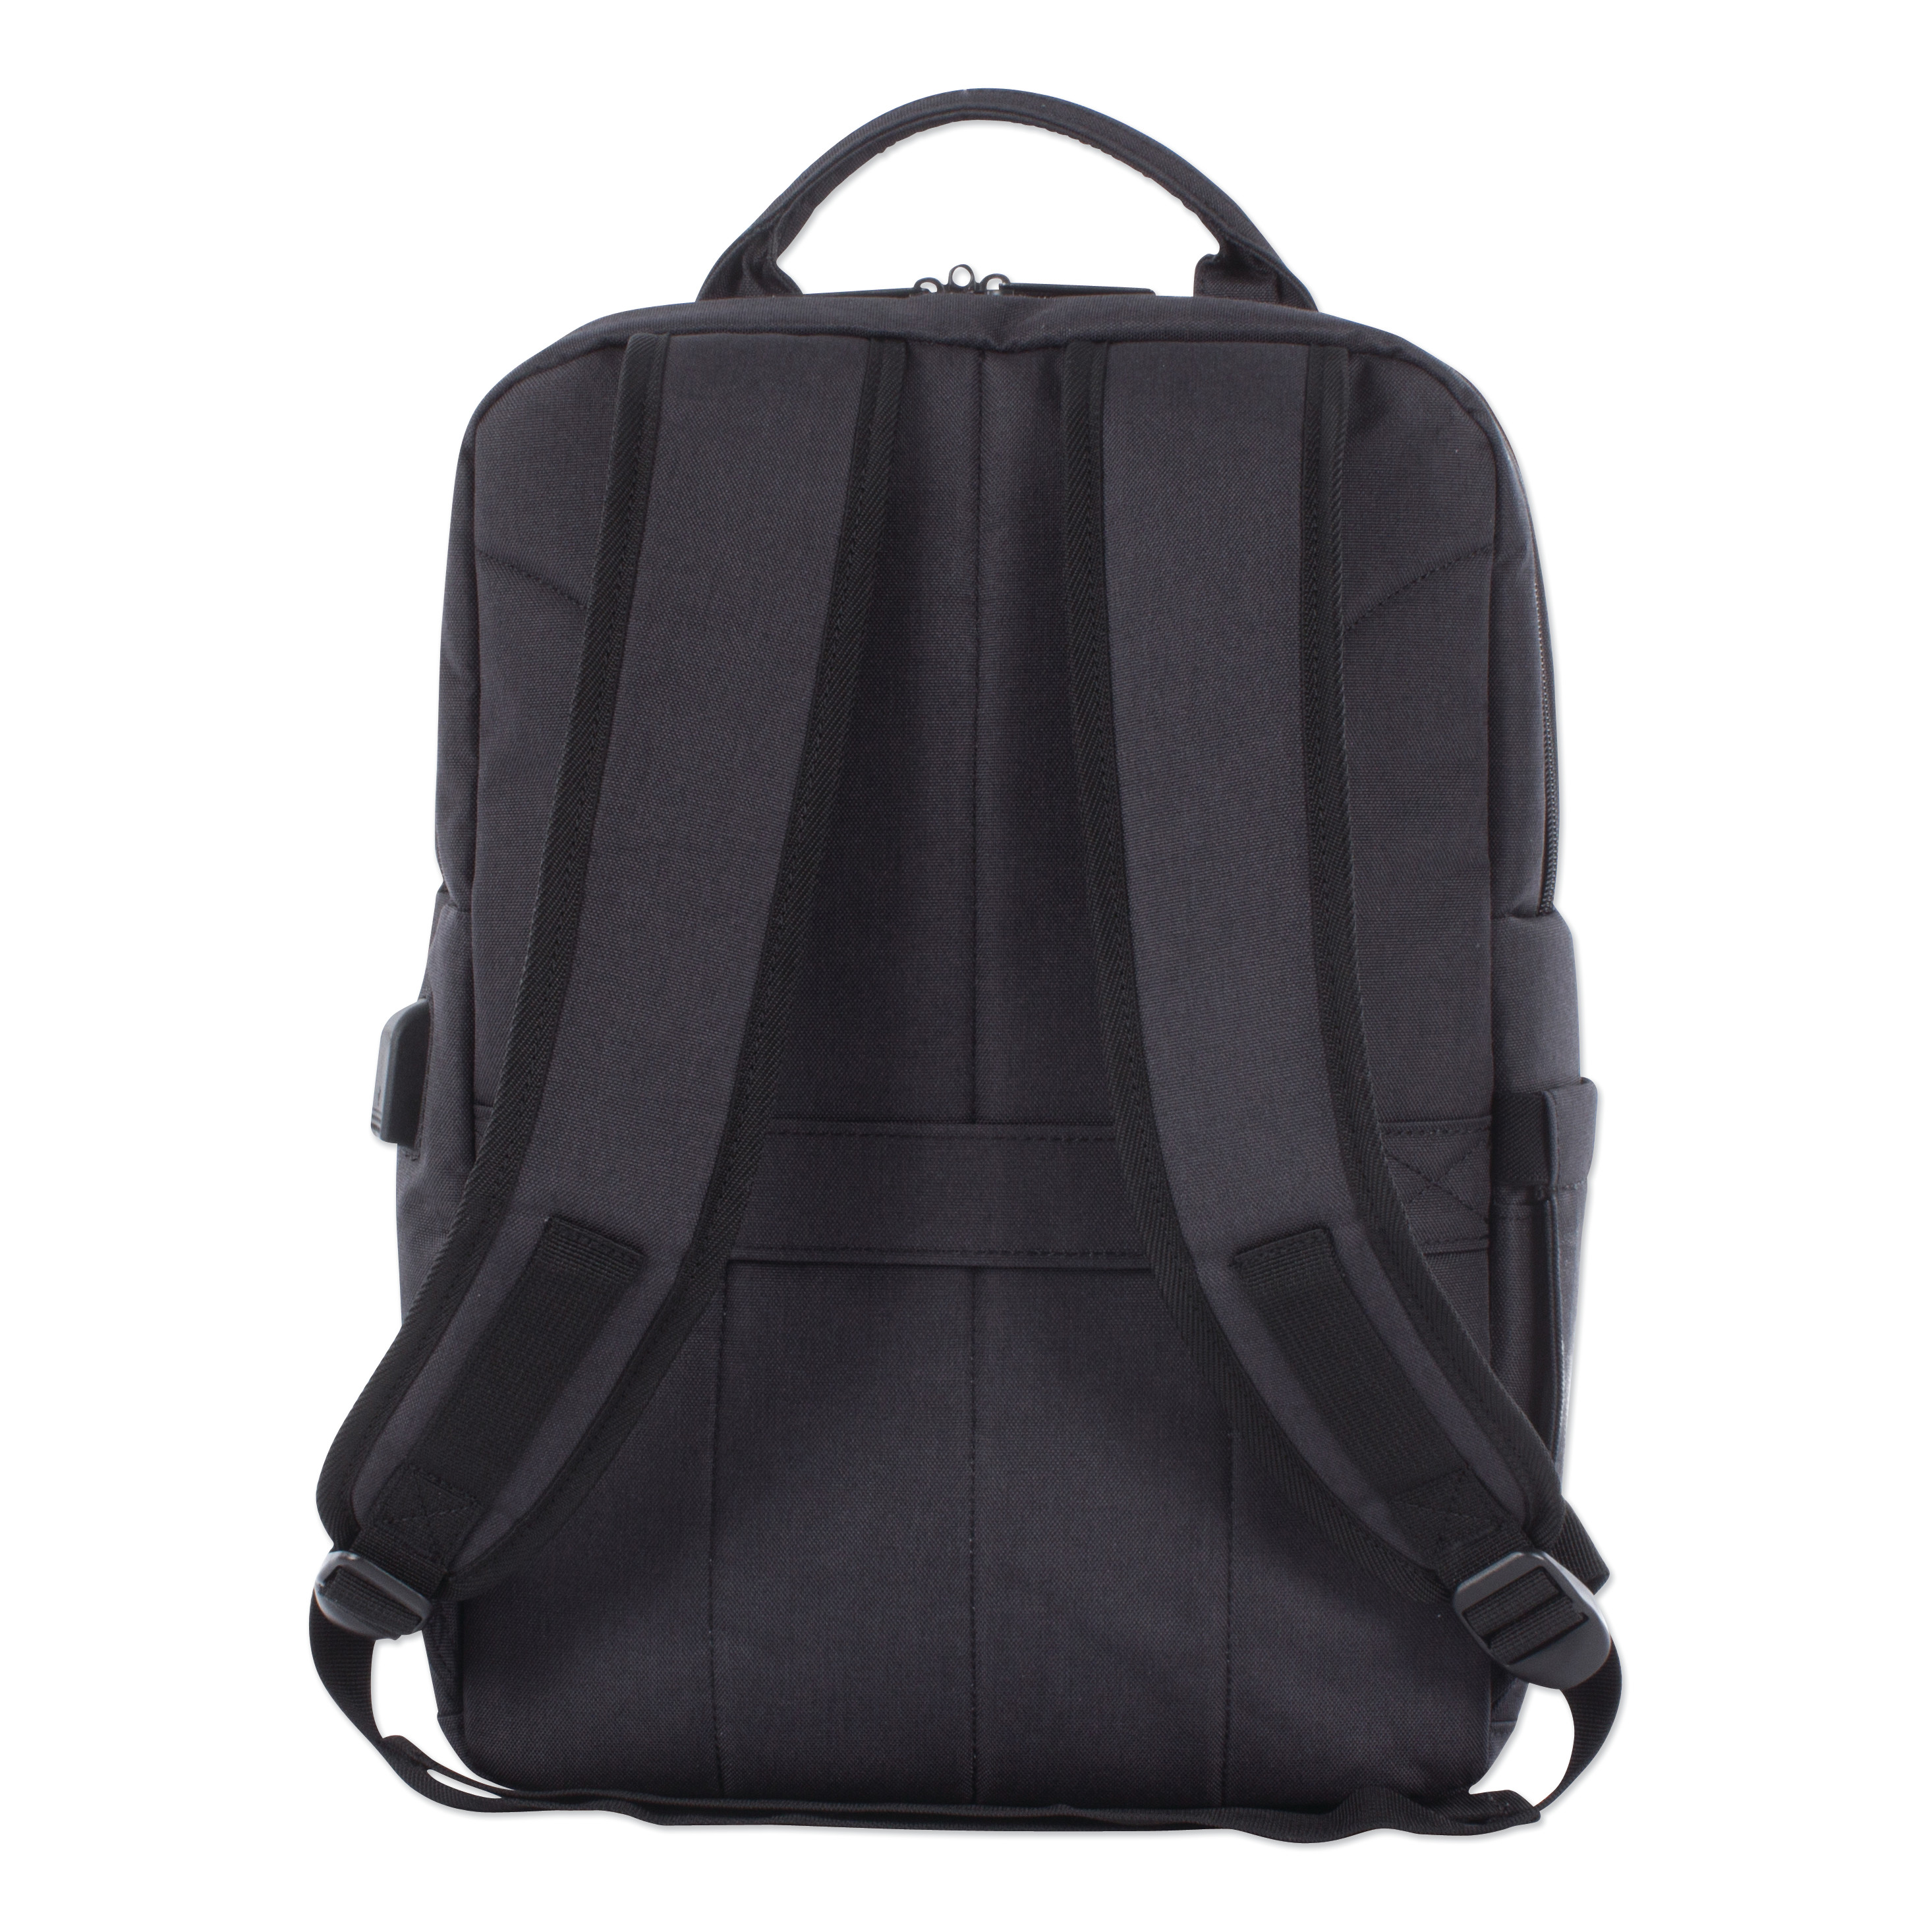 Swiss Mobility Cadence 2 Section Business Backpack, For Laptops 15.6", 6" x 6" x 17", Charcoal -SWZBKP1012SMCH - image 2 of 5